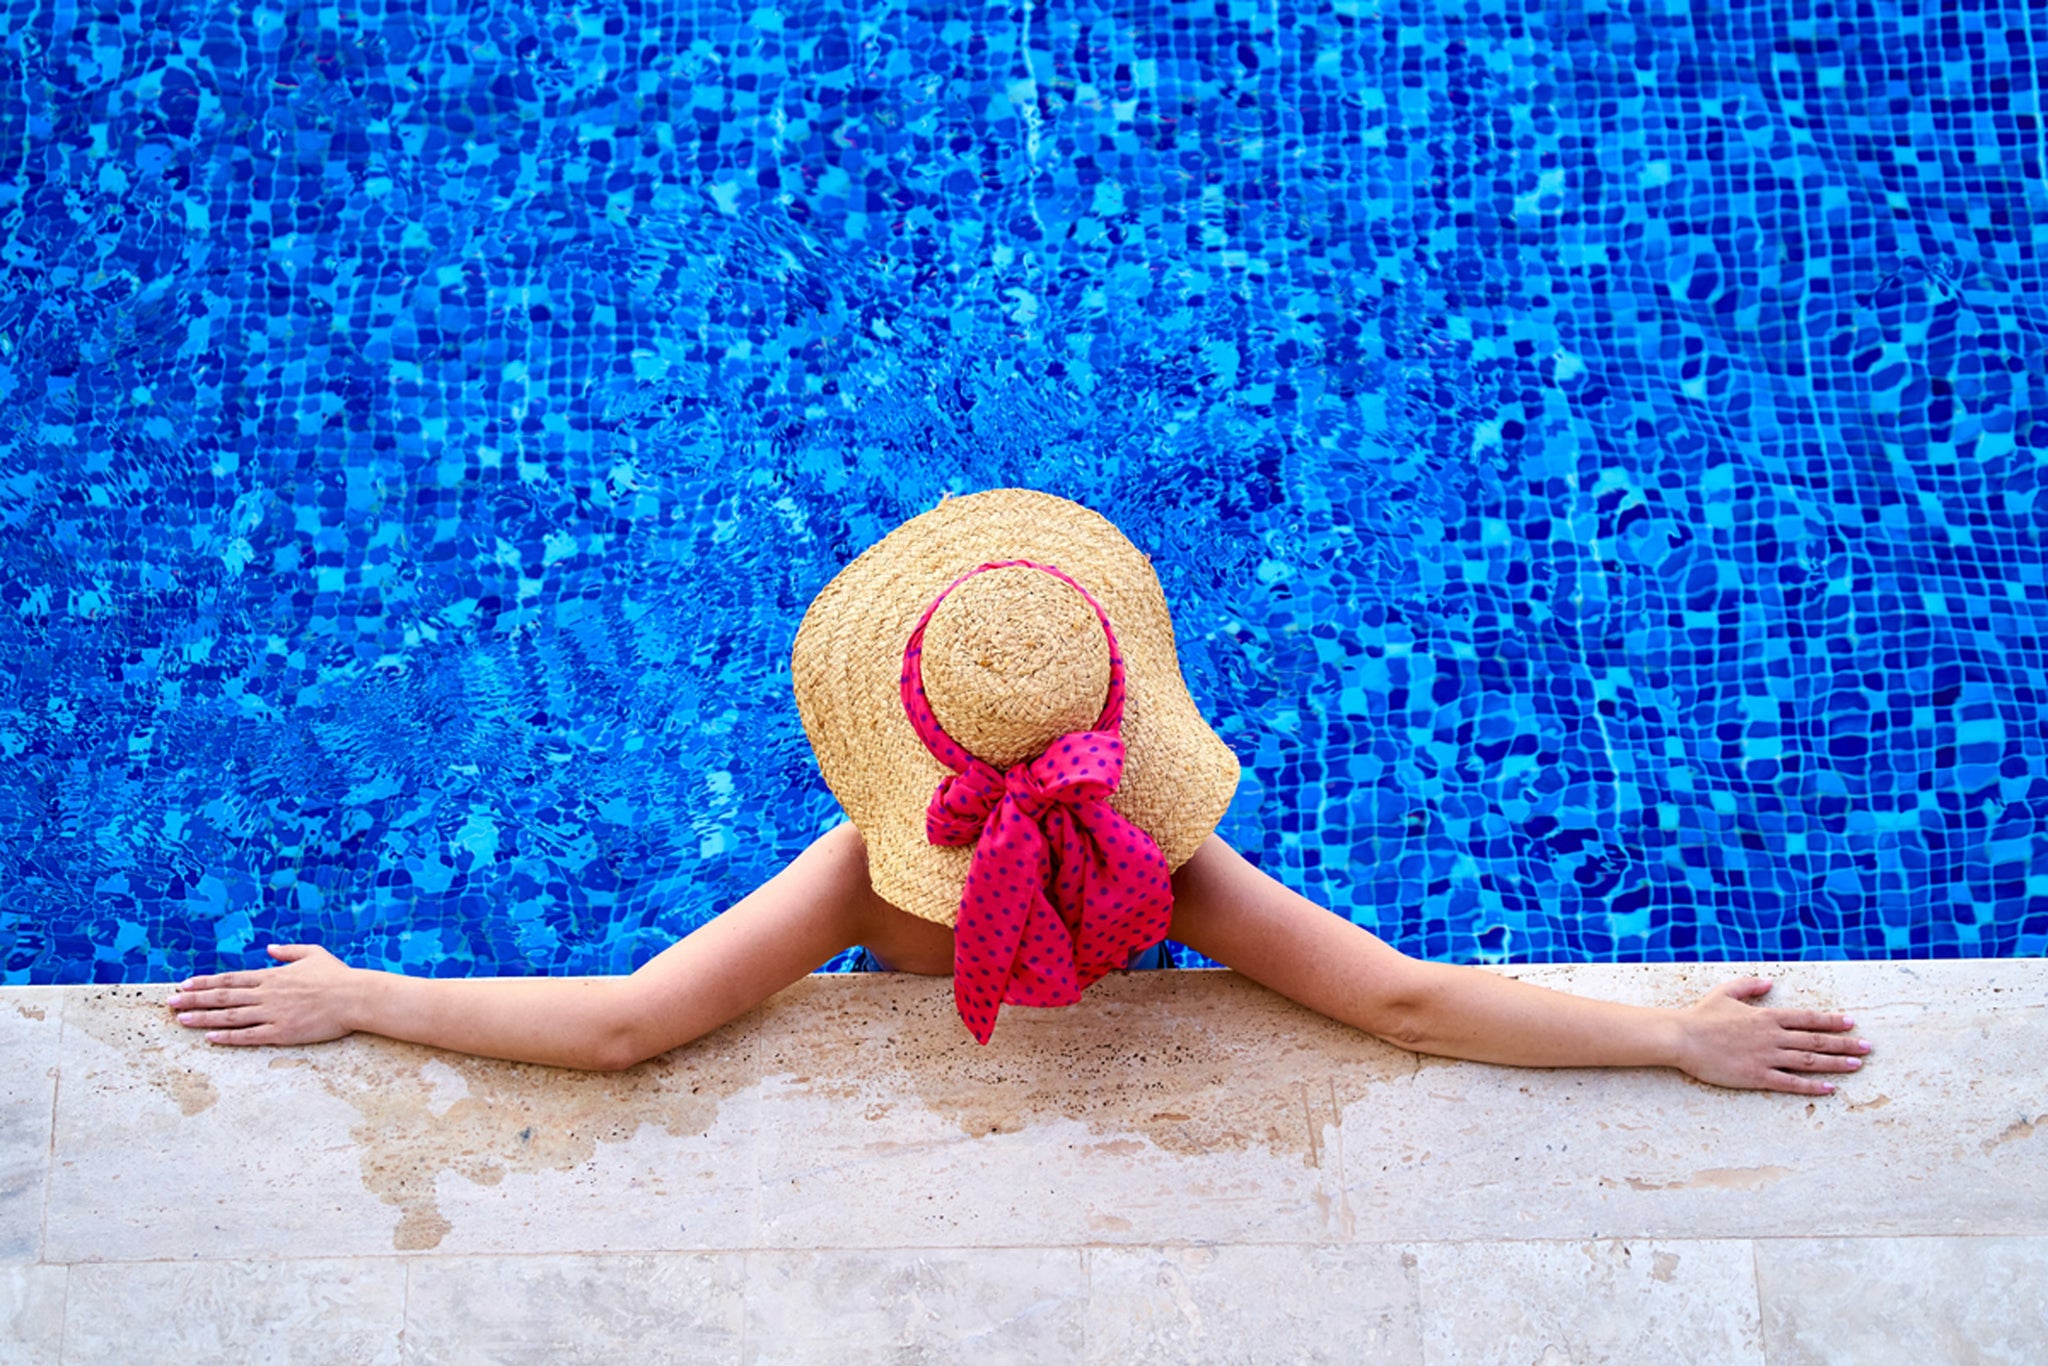 Keeping cool this summer with Ayurveda | Triveda blog